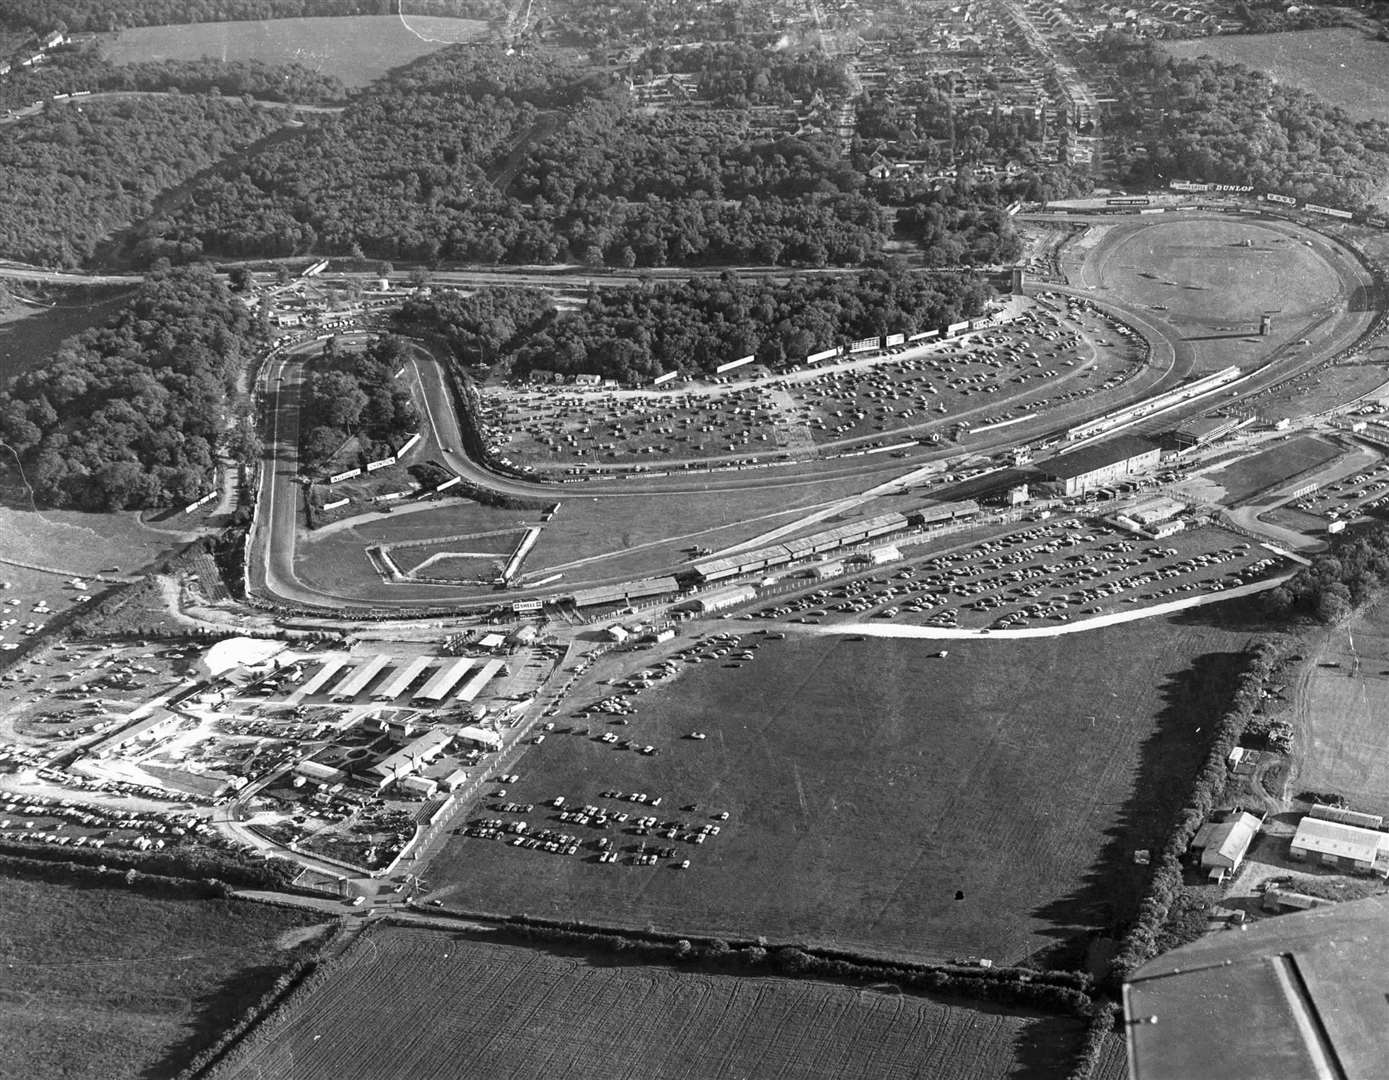 Formula 1 was hosted at Brands Hatch until 1986 – here the track is pictured in January 1970